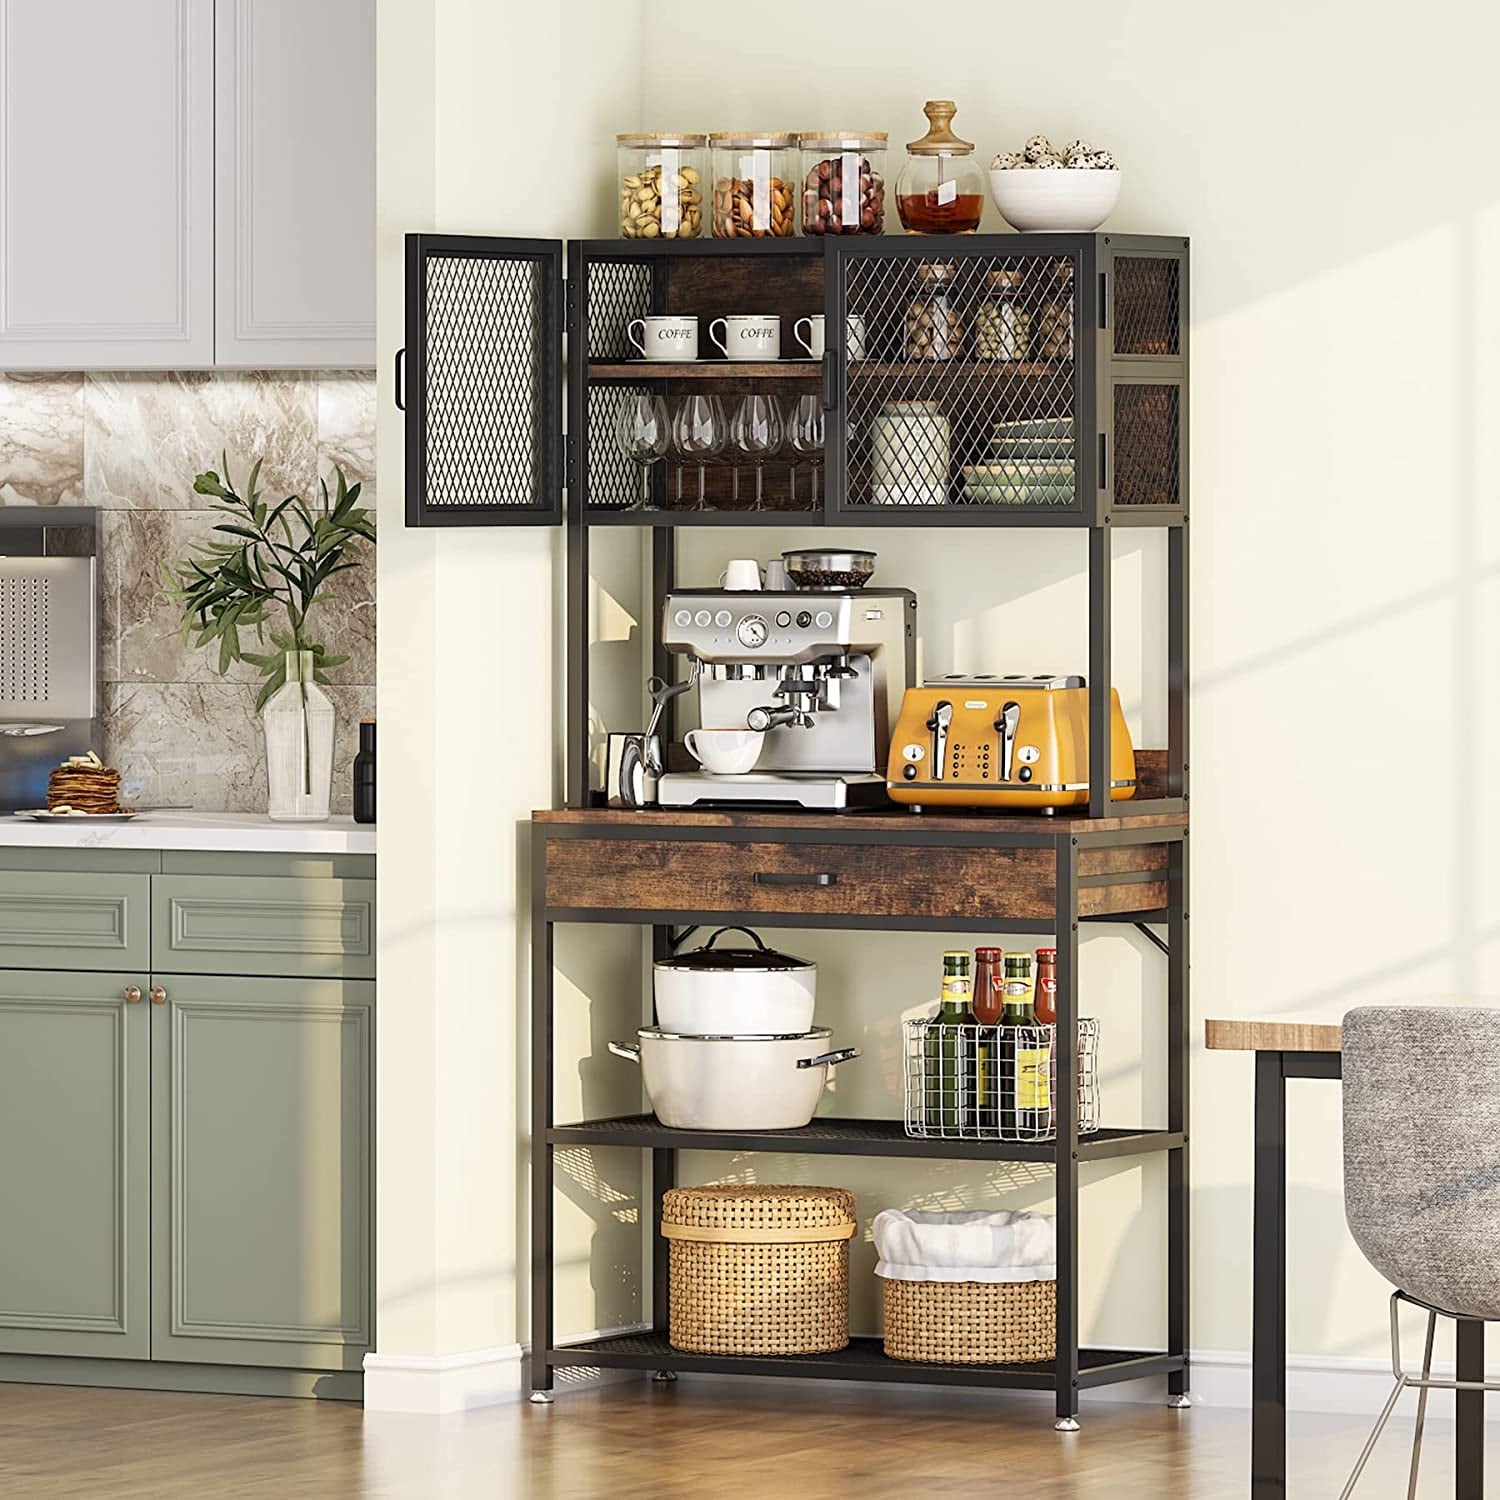 https://ak1.ostkcdn.com/images/products/is/images/direct/67ff88b9c1fe4e293dc75d21708dcf087cc08a9f/Kitchen-Bakers-Rack-with-Storage-Shelves-Cabinet-and-Drawer.jpg